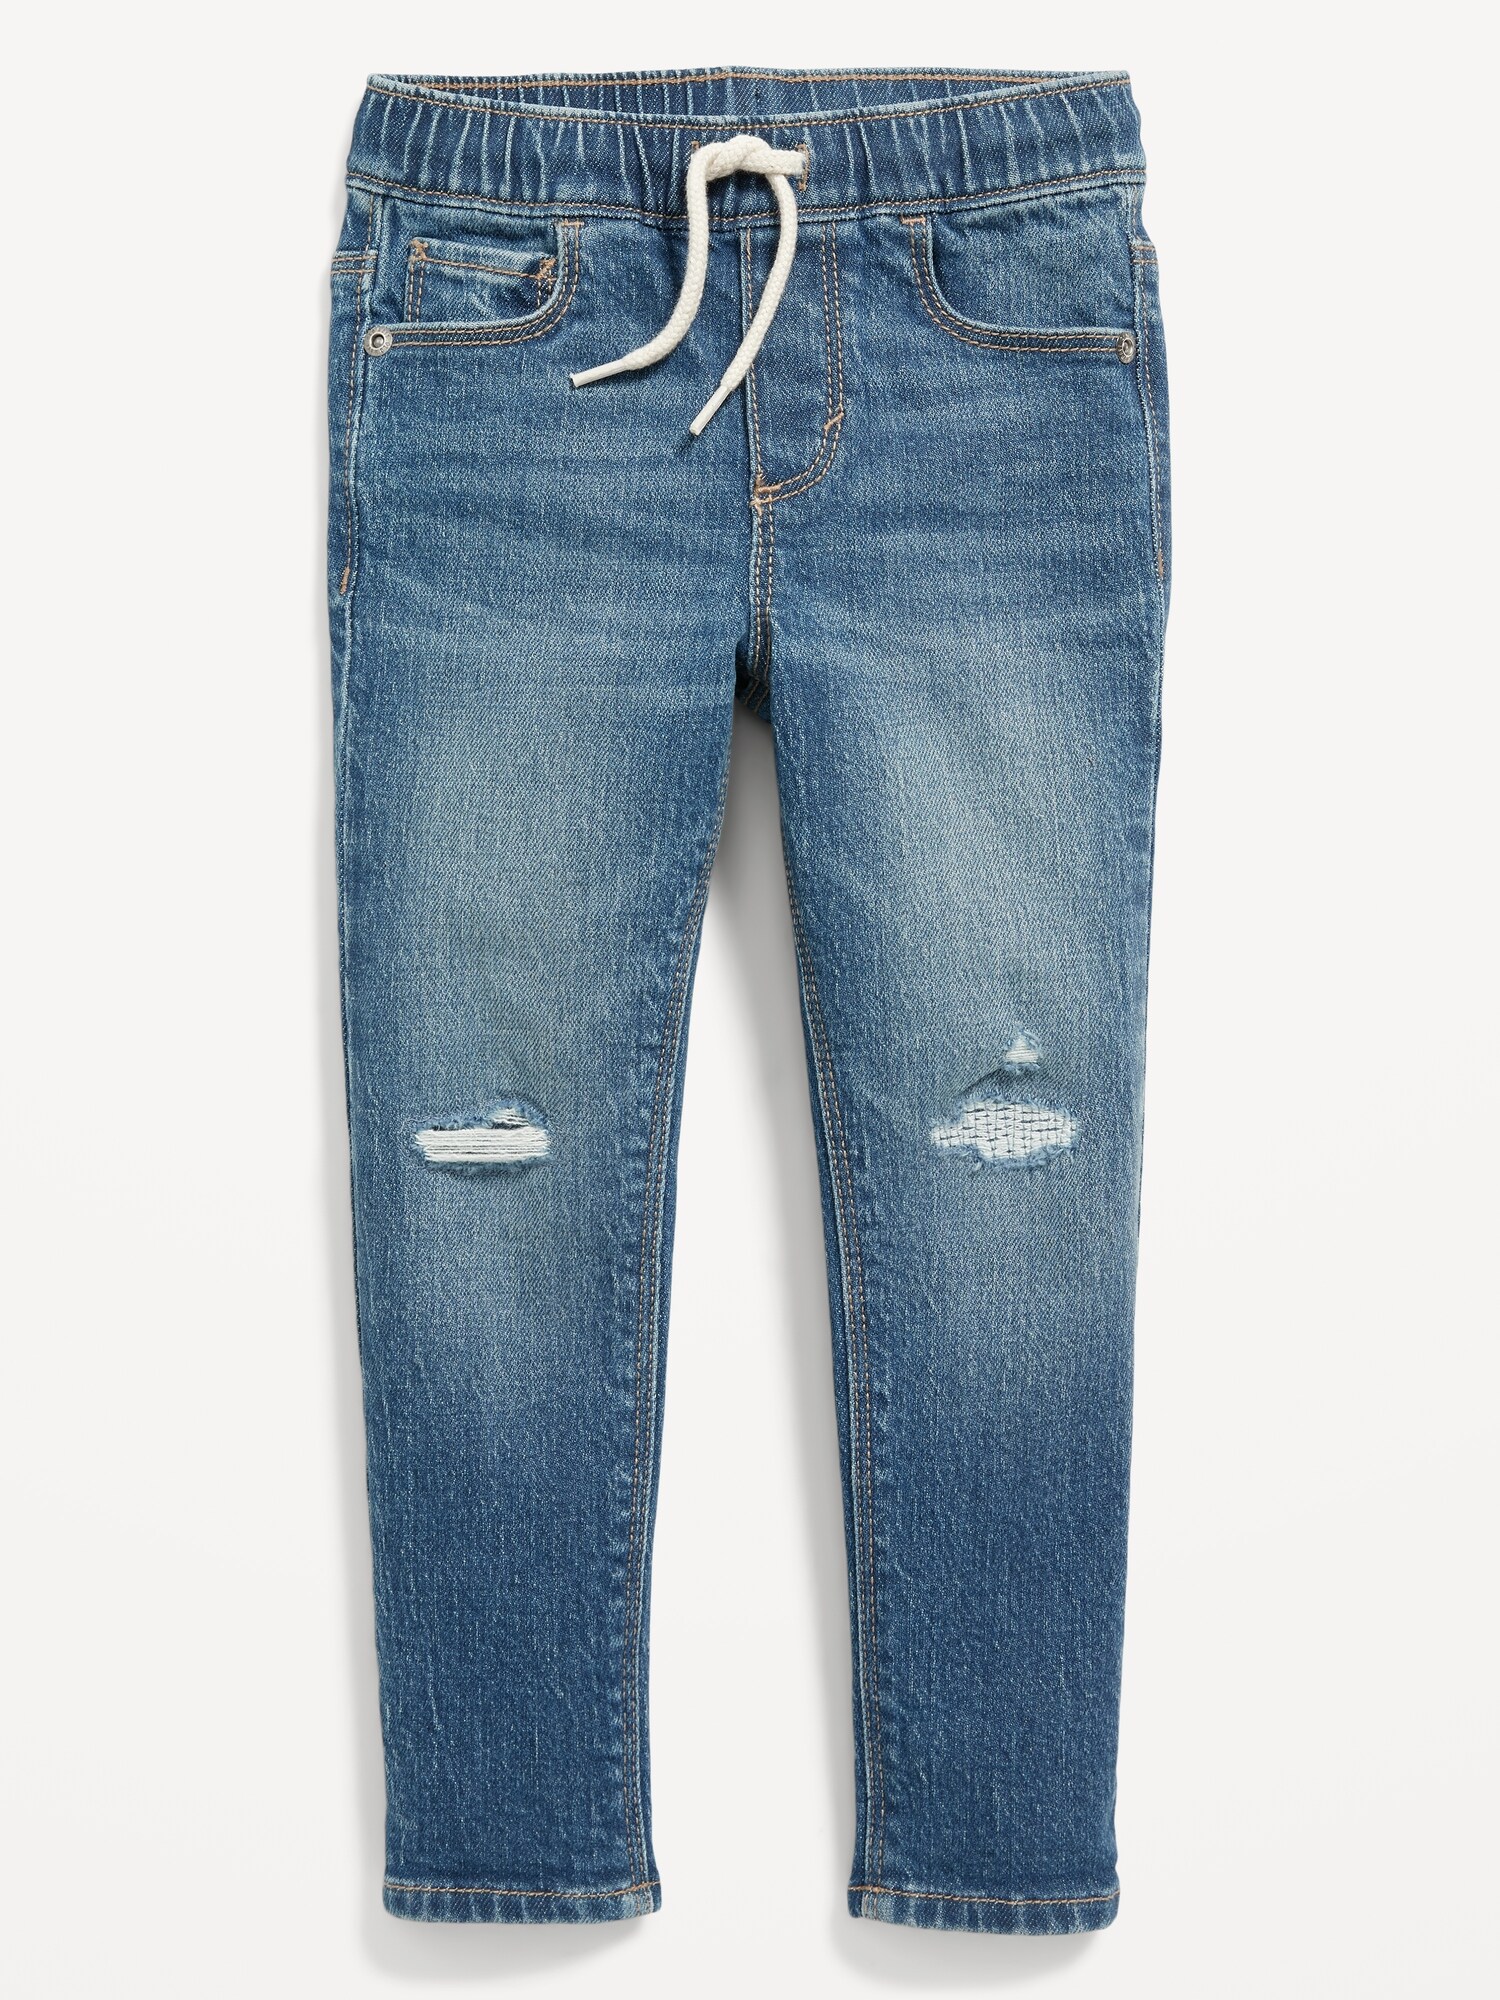 360° Stretch Skinny Jeans for Toddler Boys | Old Navy